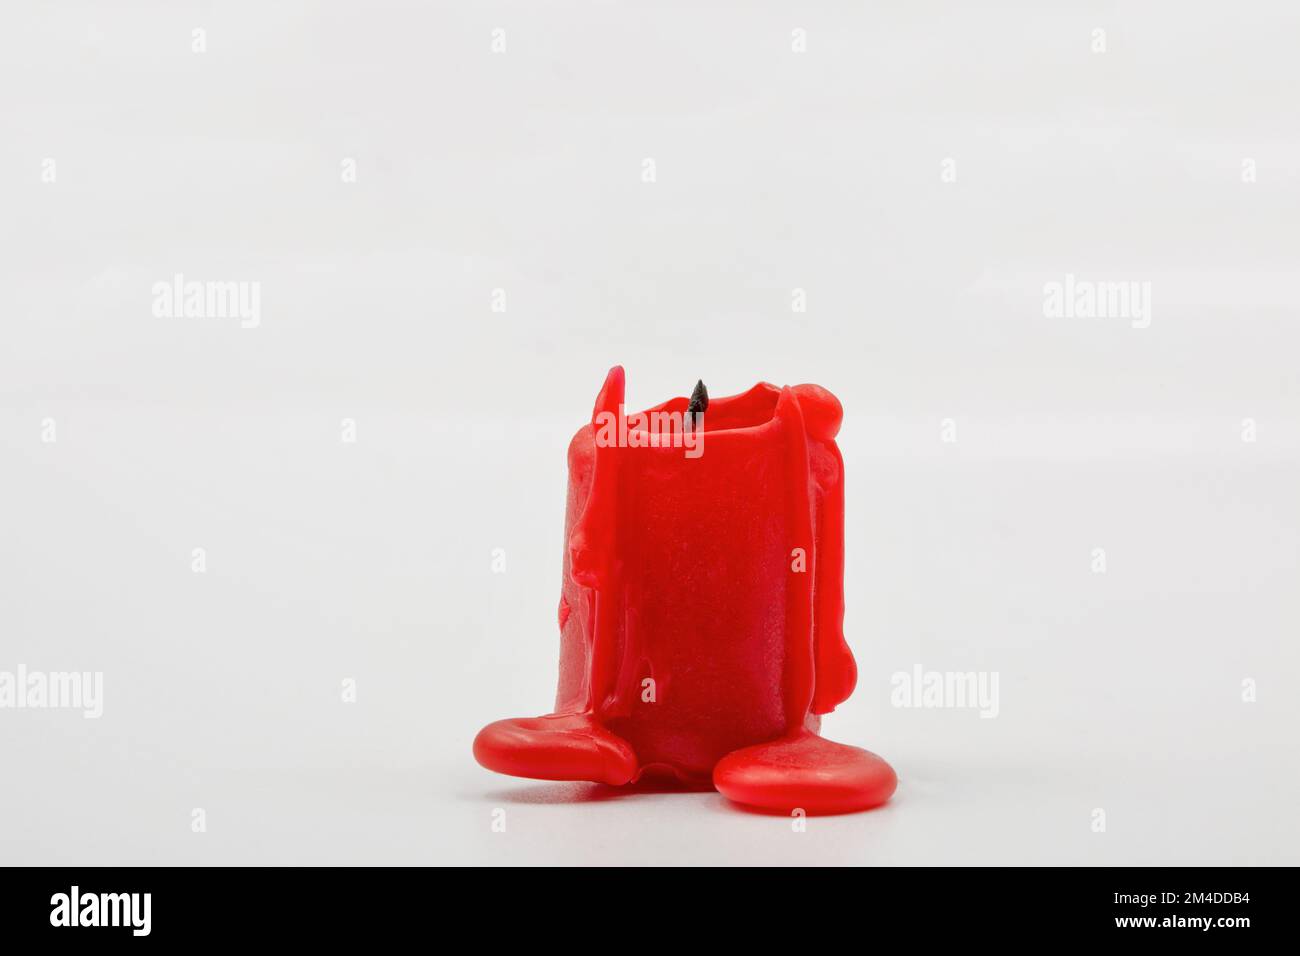 small red candle stub closeup on white background Stock Photo